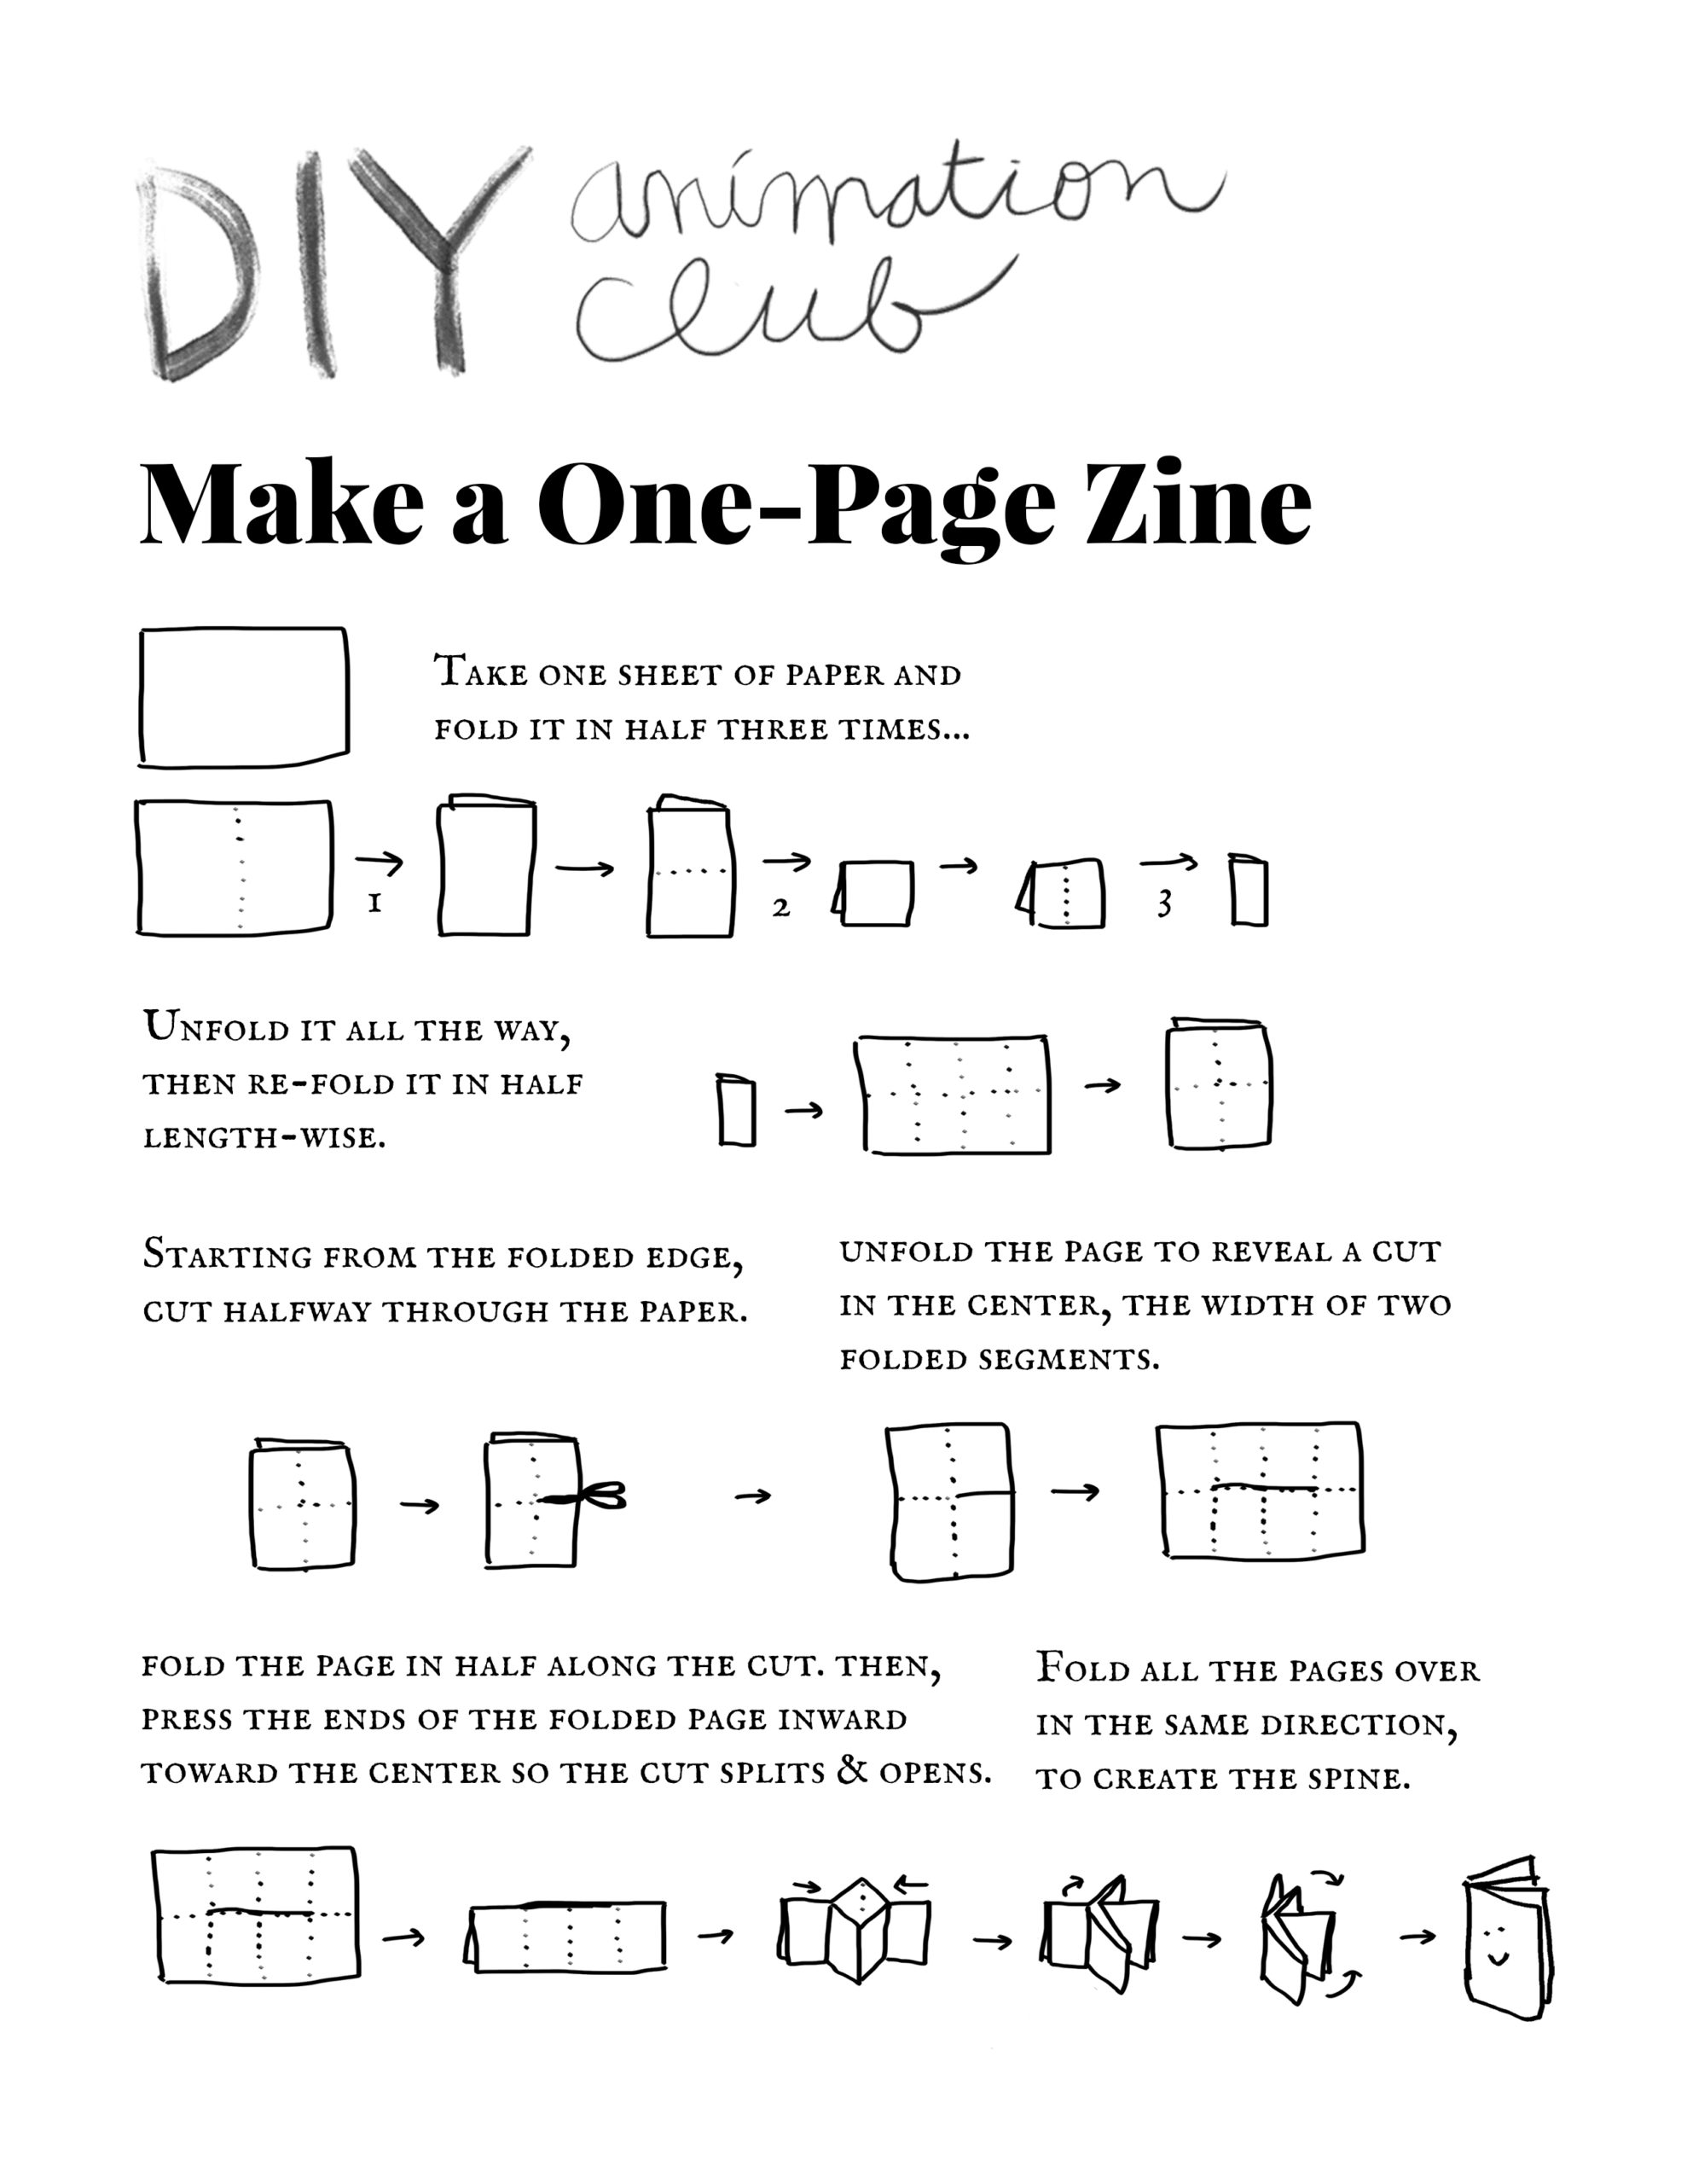 Instructions for making a 1-page zine (jpg)